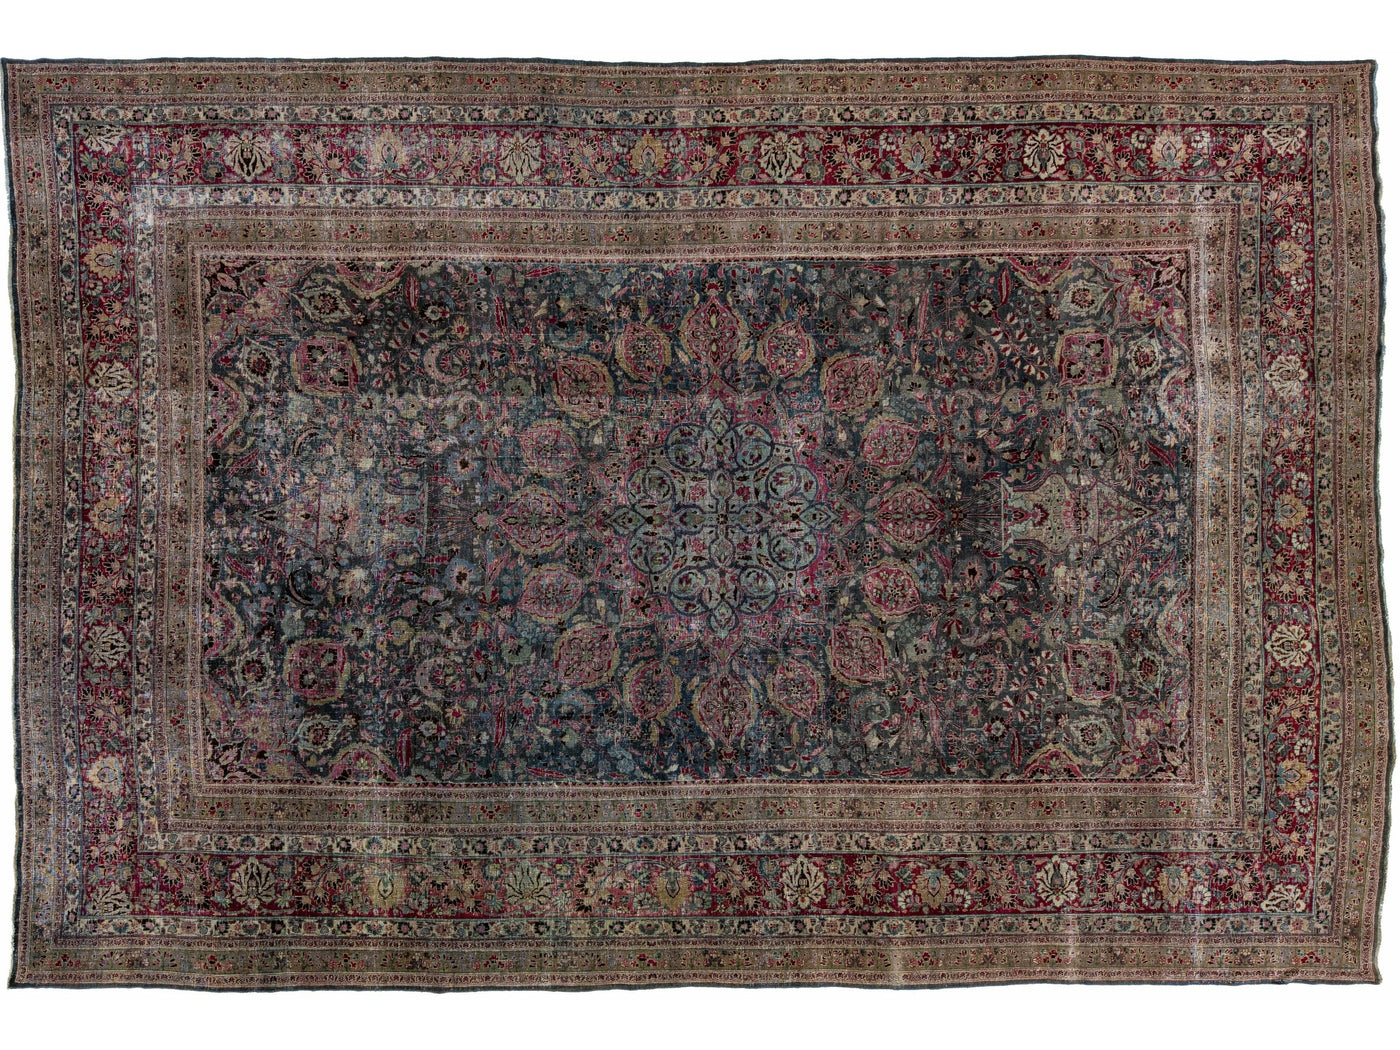 Early 20th Century Overdyed Handmade Gray & Pink Wool Rug